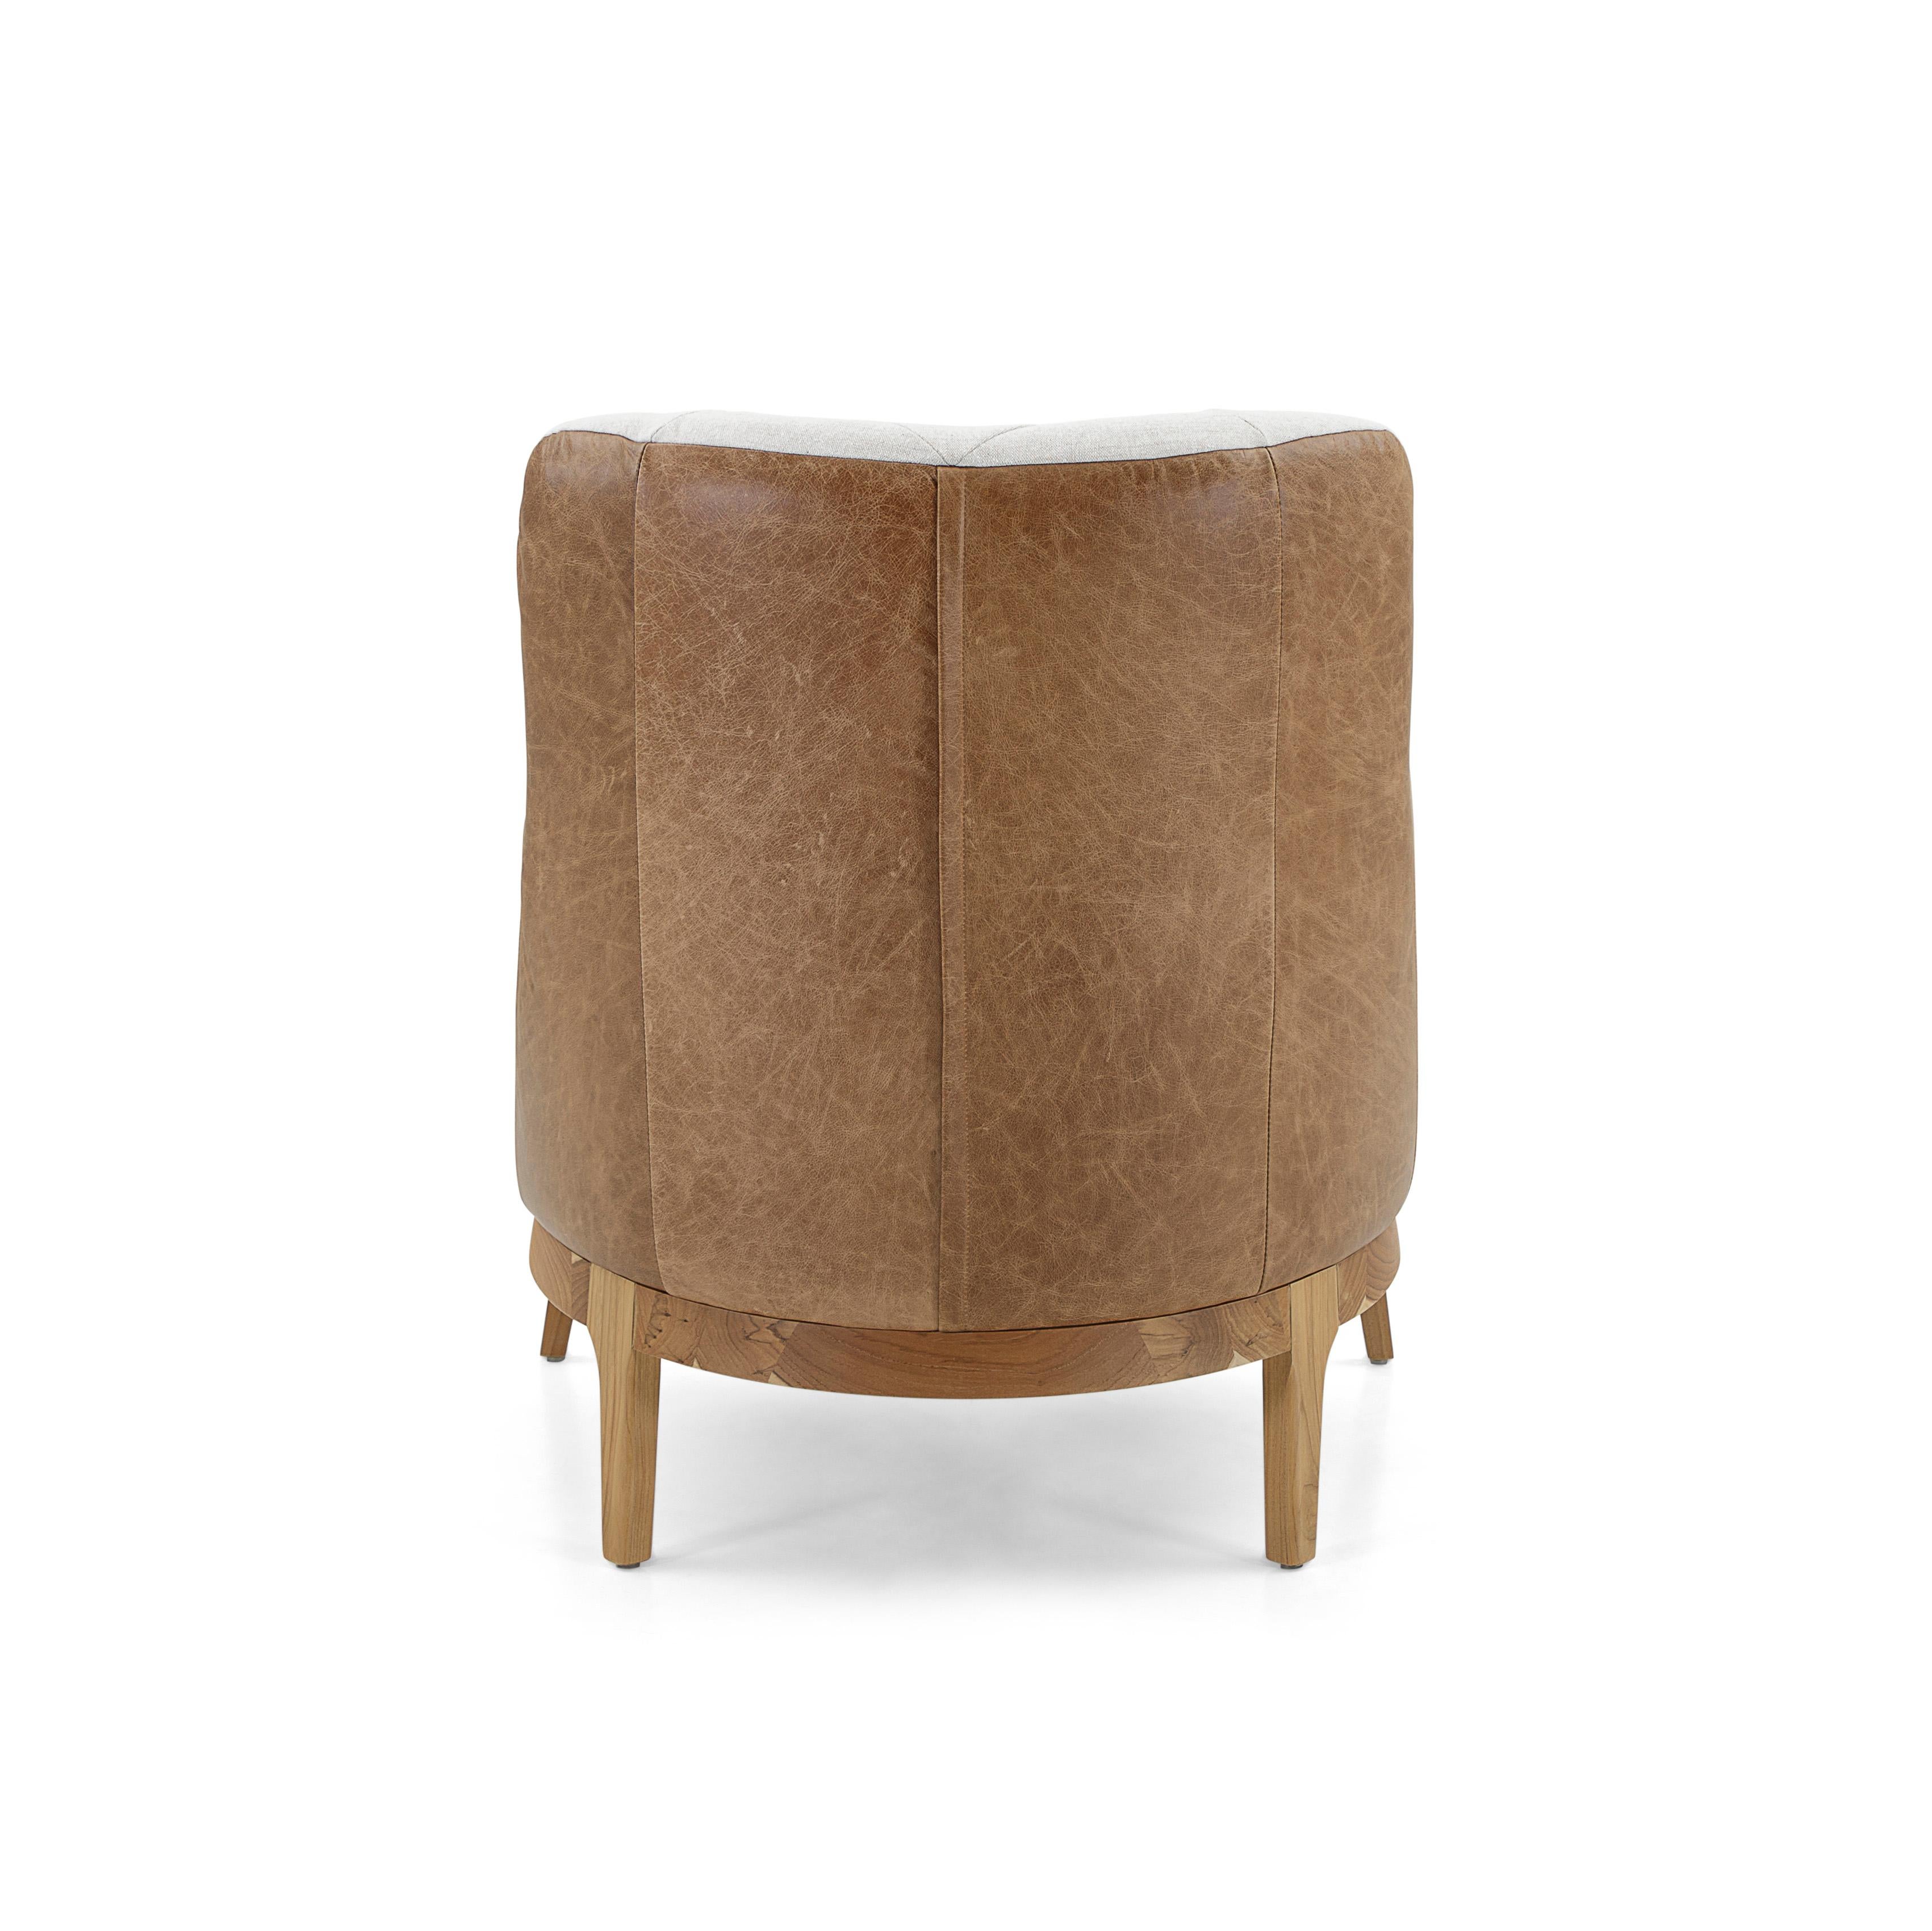 Brazilian Athos Armchair Upholstered in Leather and Fabric in Teak Wood Finish For Sale